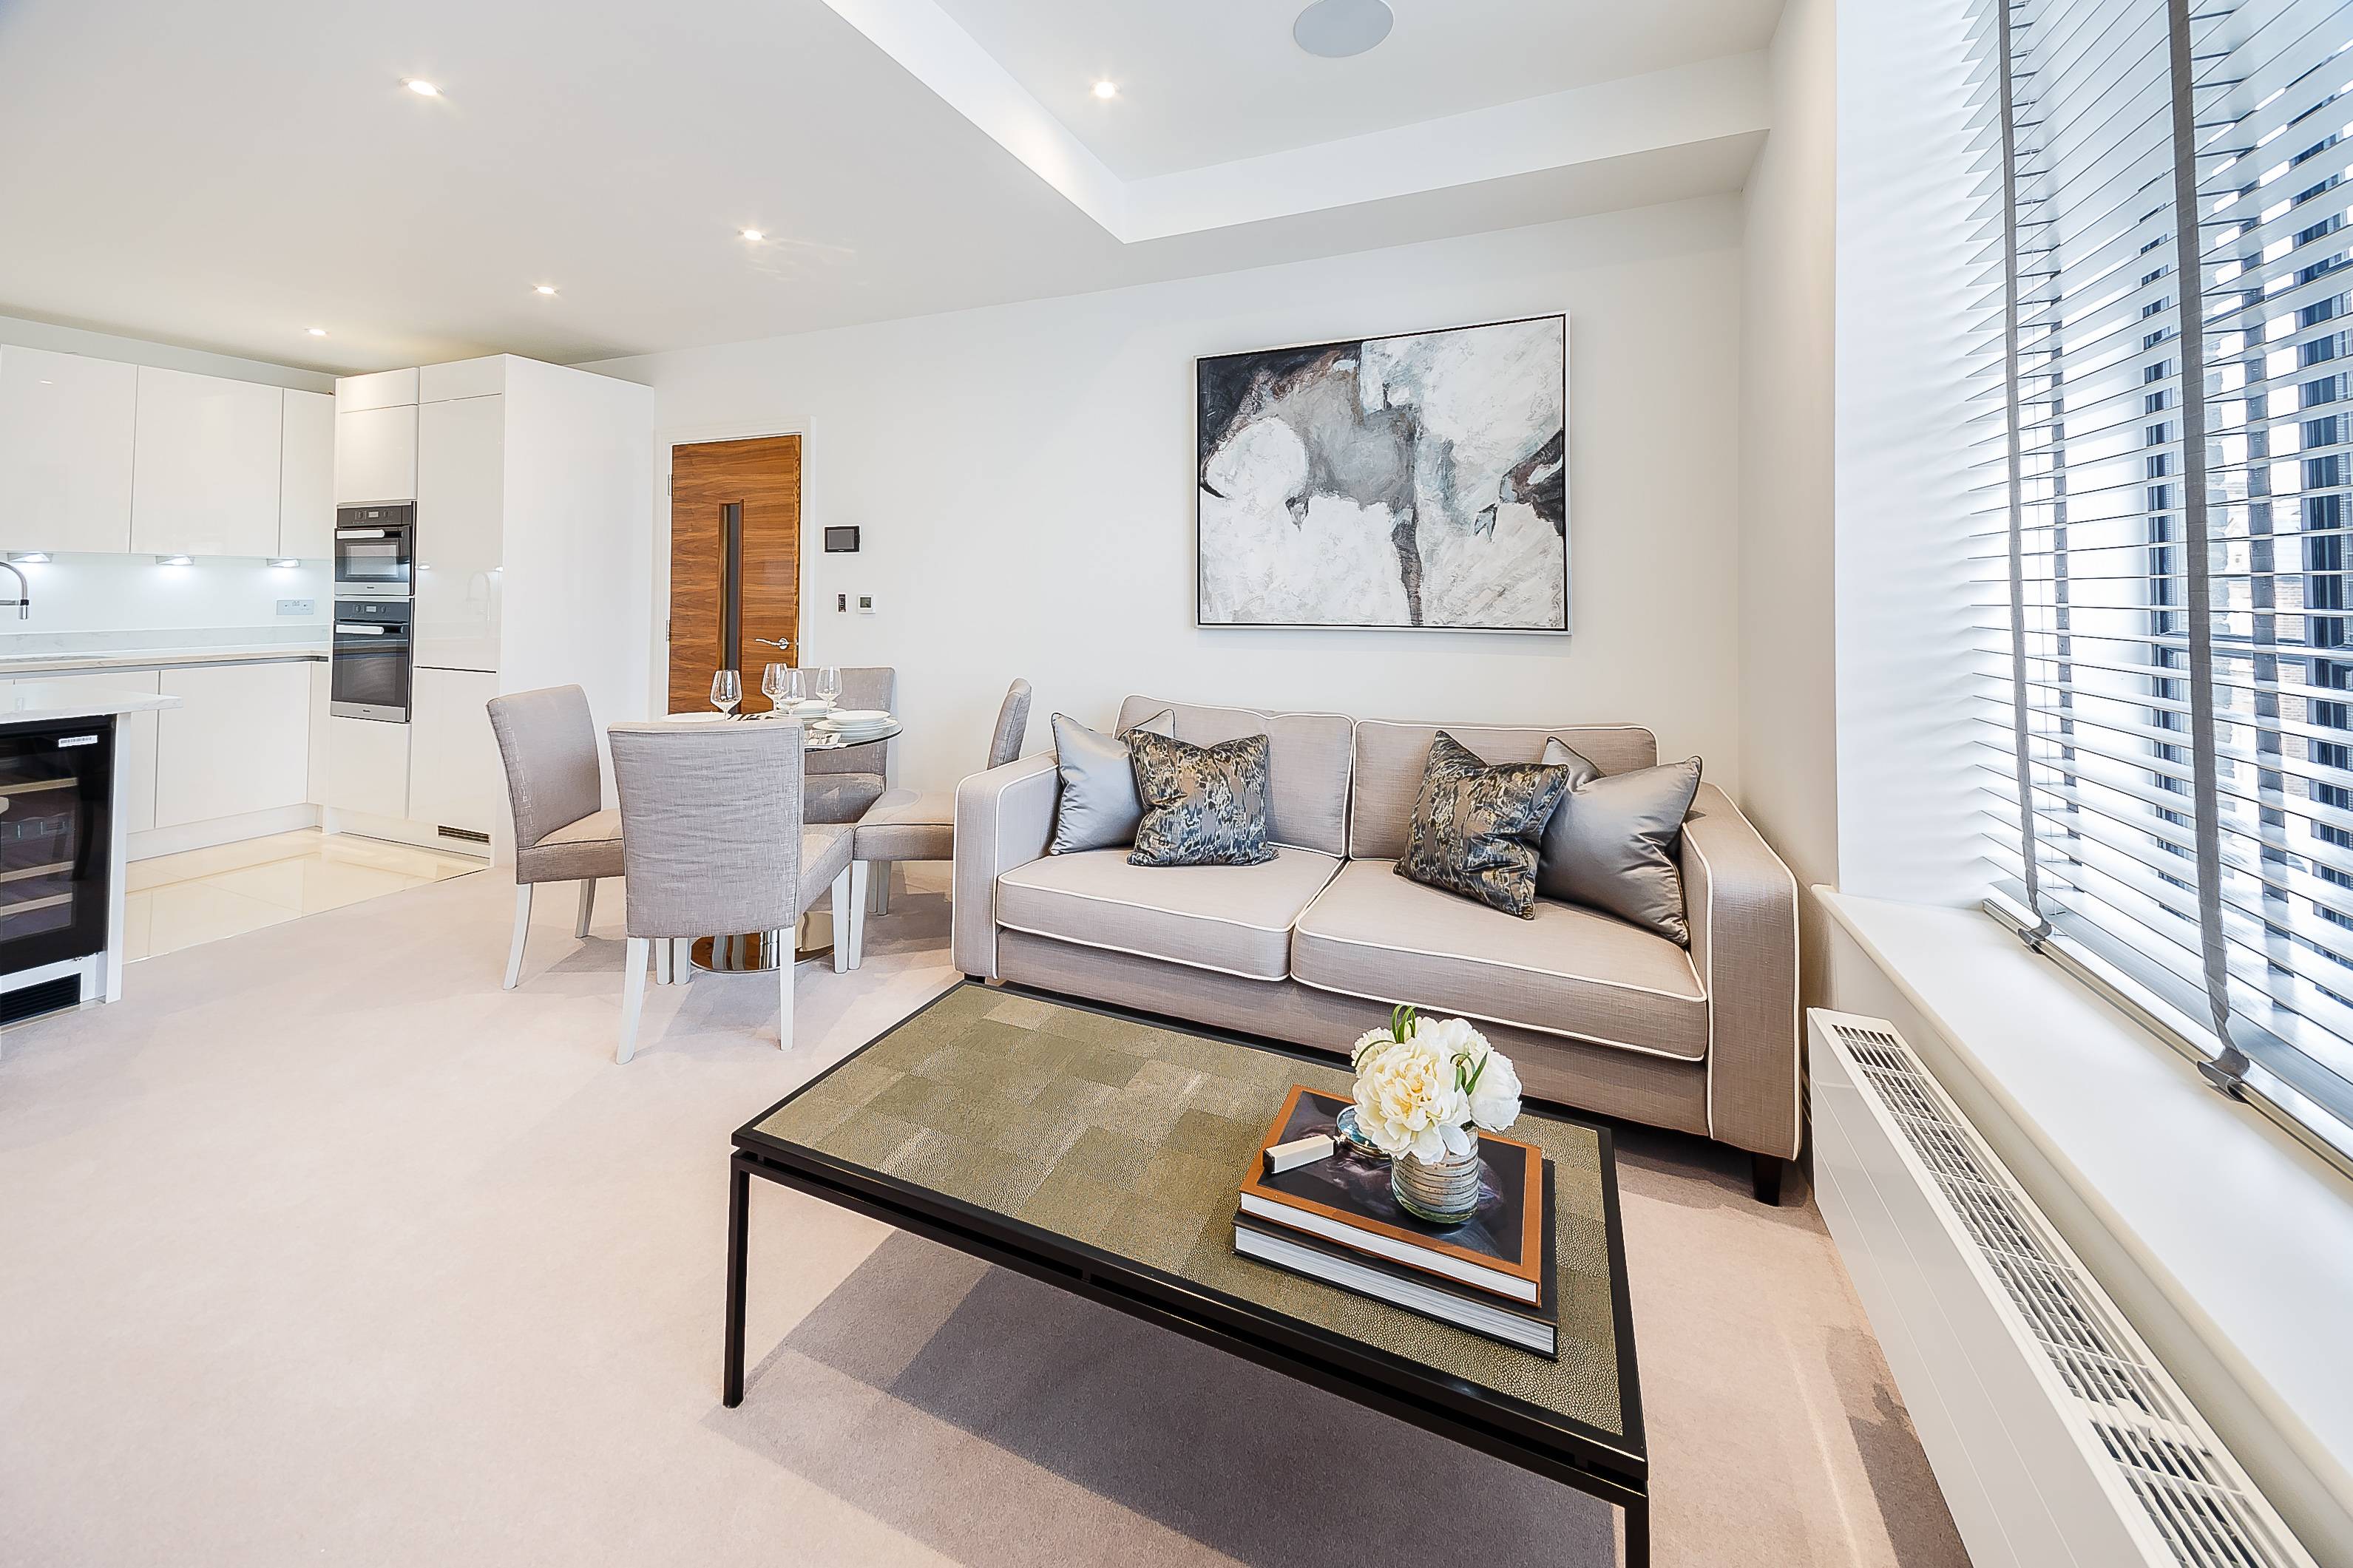 A strikingly brand-new interior designed two-bedroom, two-bathroom first floor apartment set within this newly converted, warehouse style, gated development on the River Thames.